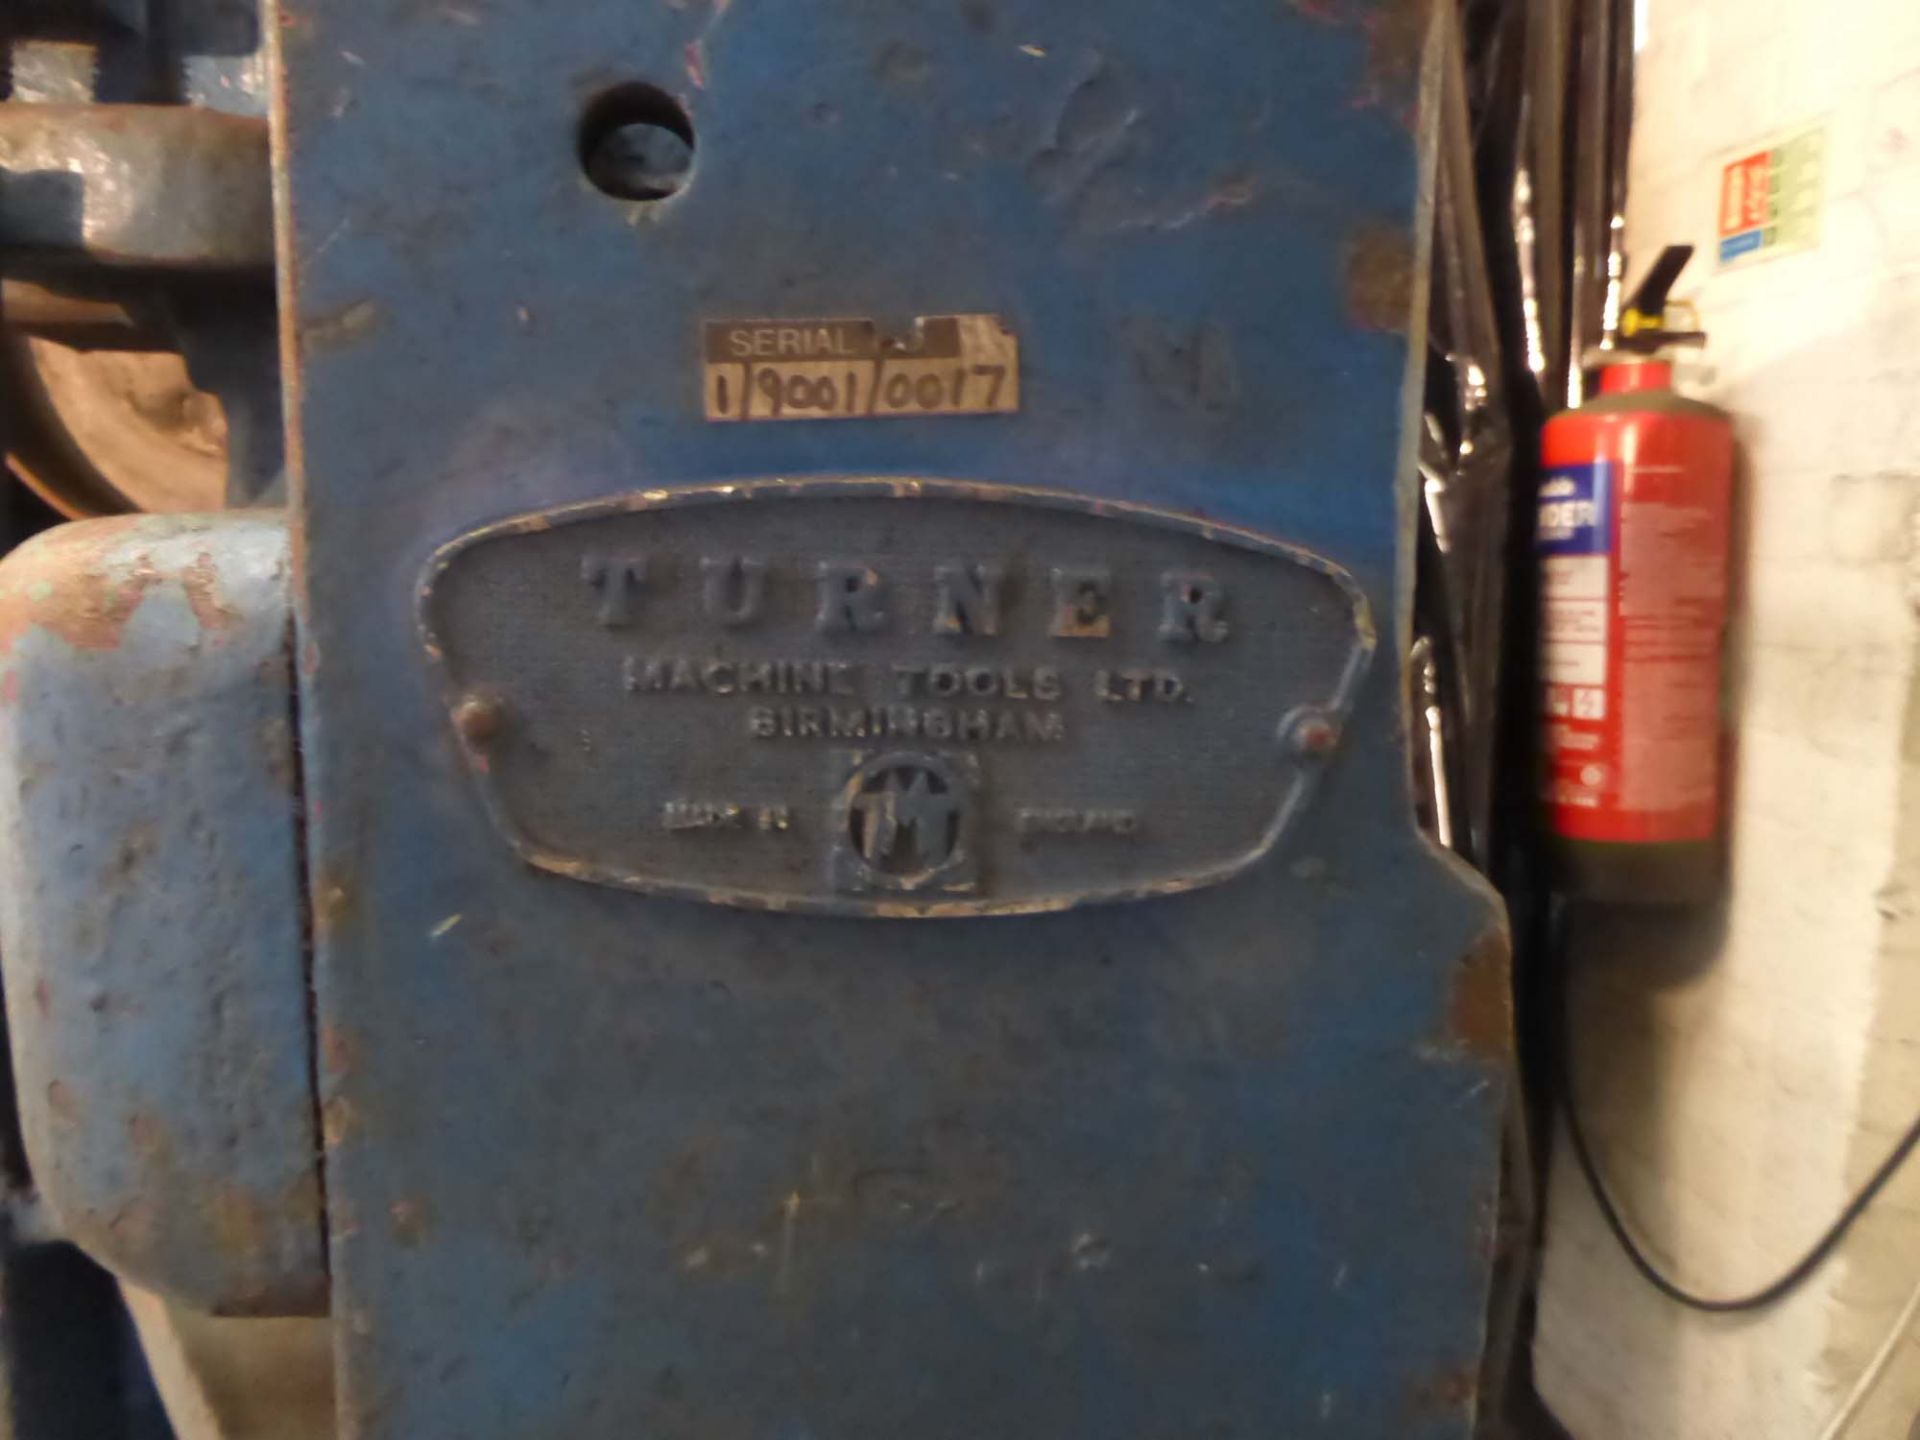 Turner 6in vertical heavy duty belt linisher, treadle operation, 3 phase electric Serial Number: 1/ - Image 2 of 2